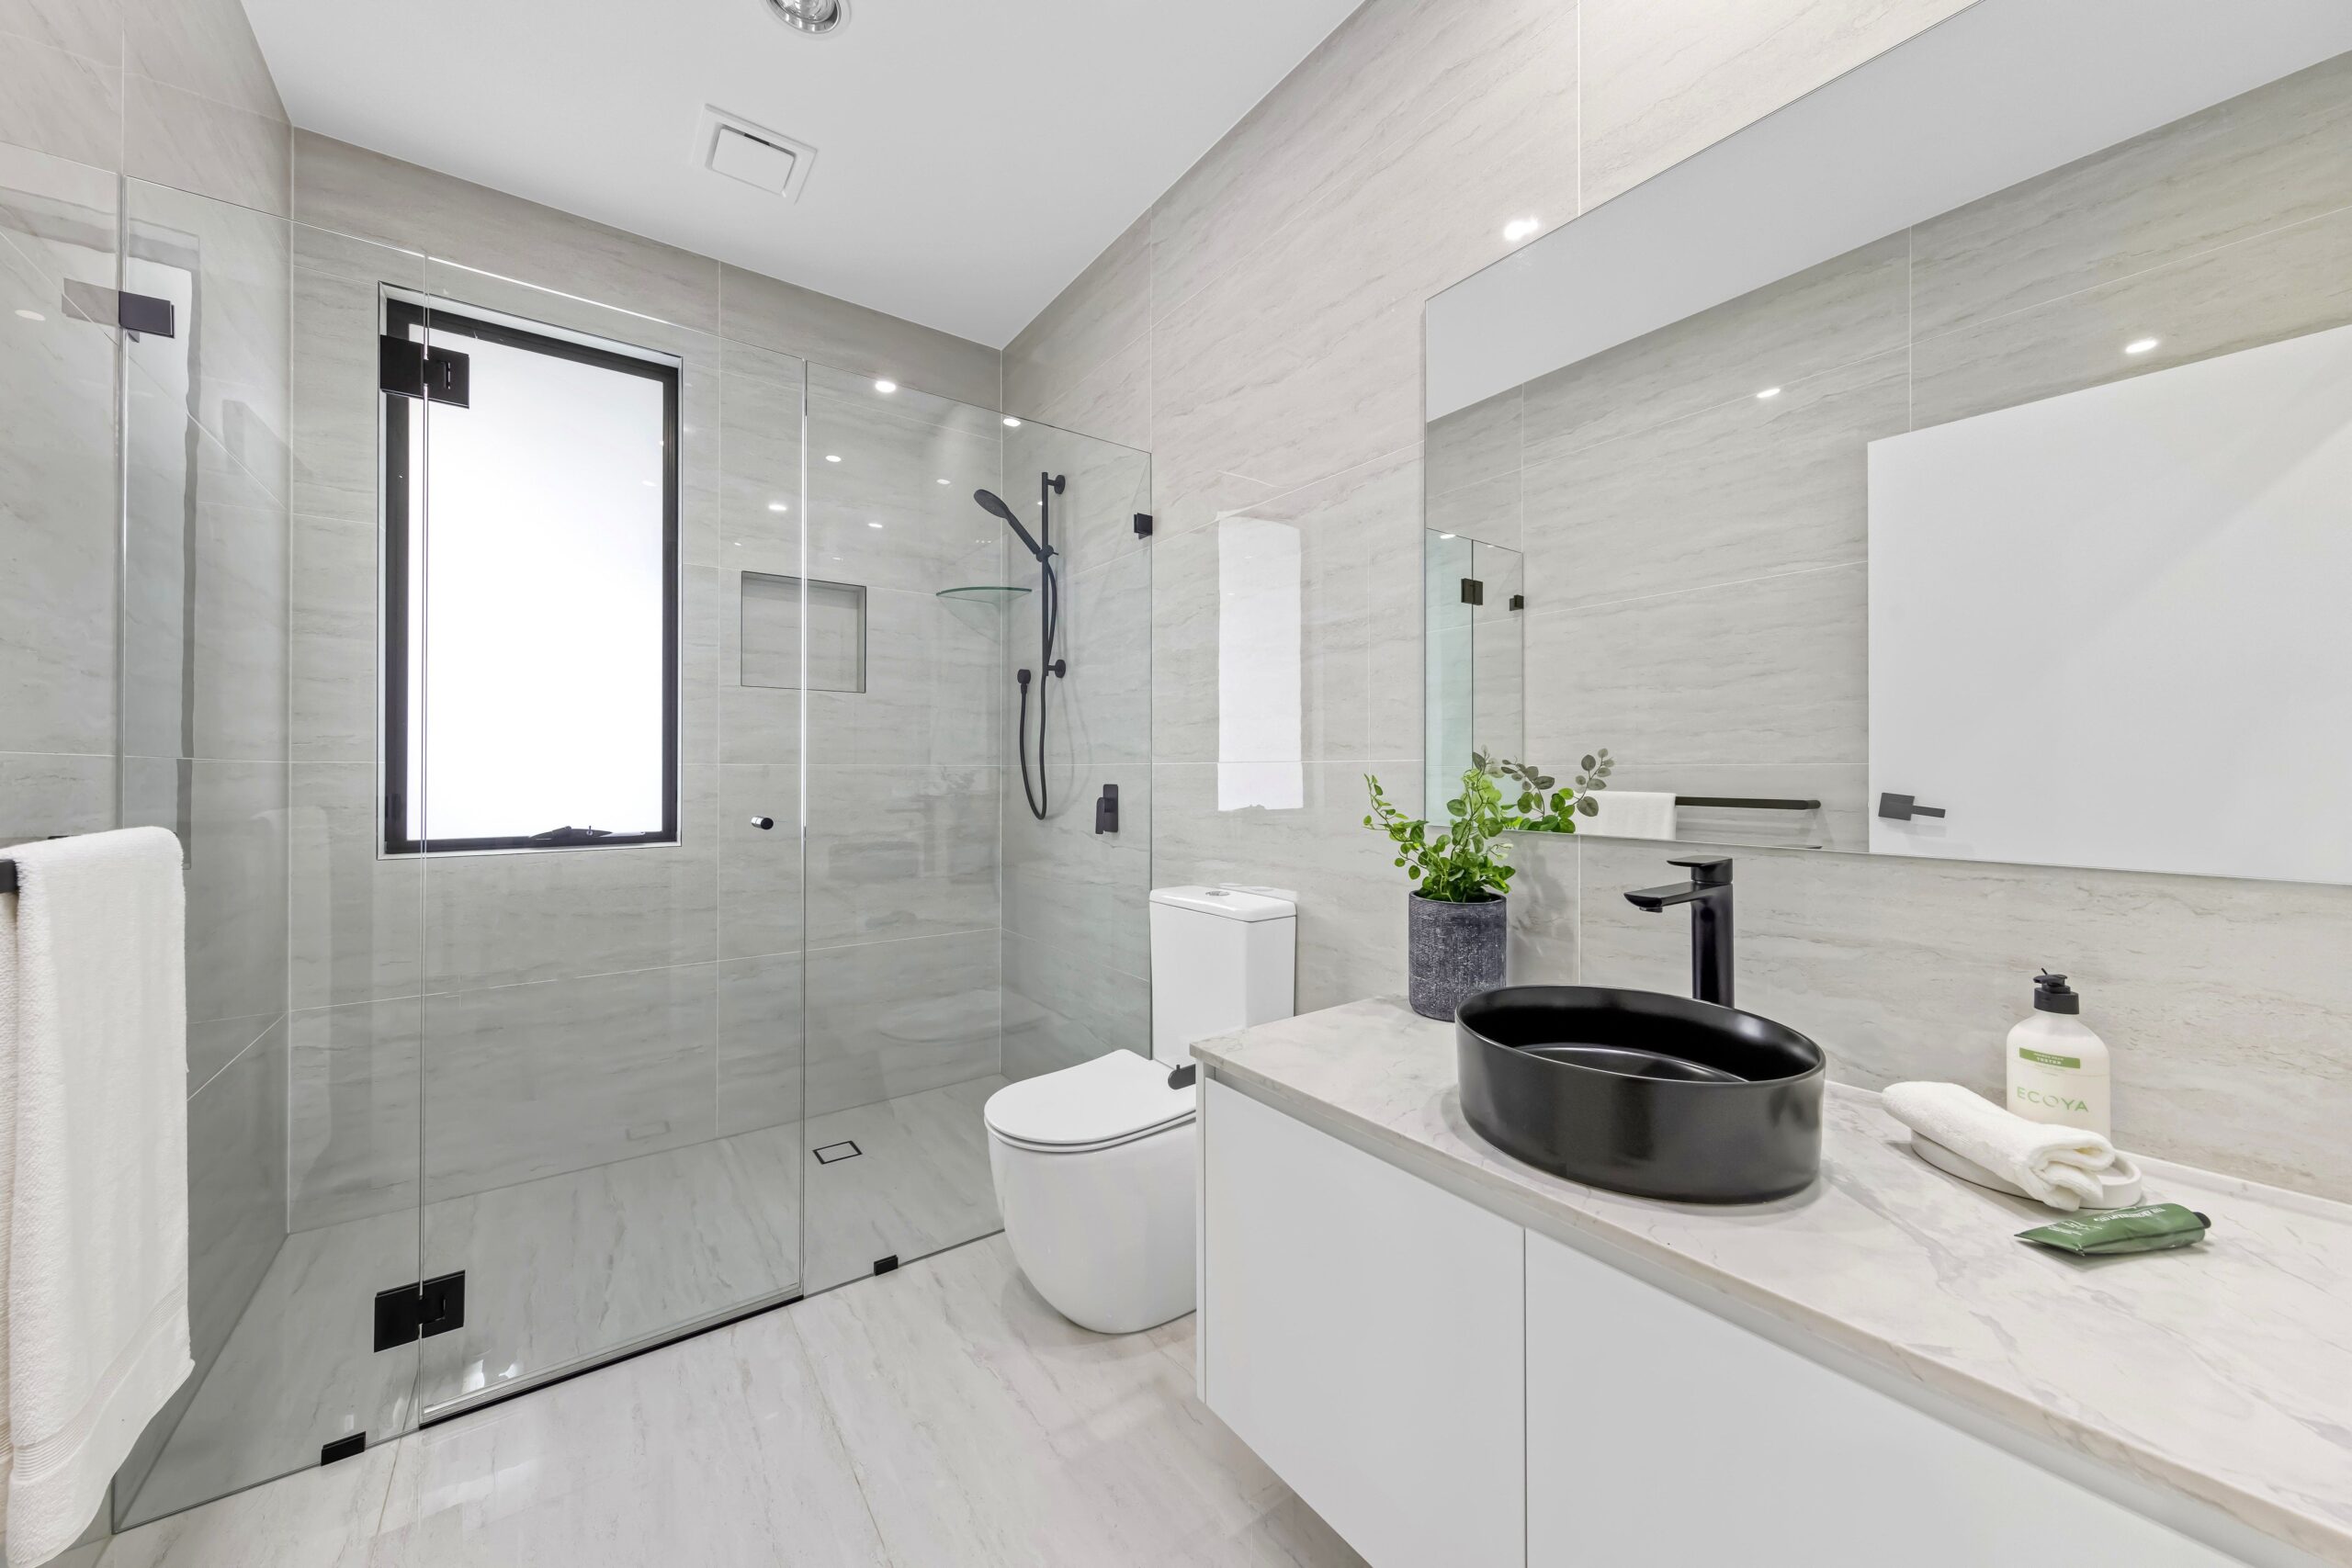 Bathroom with black sink, toilet and glass shower screen